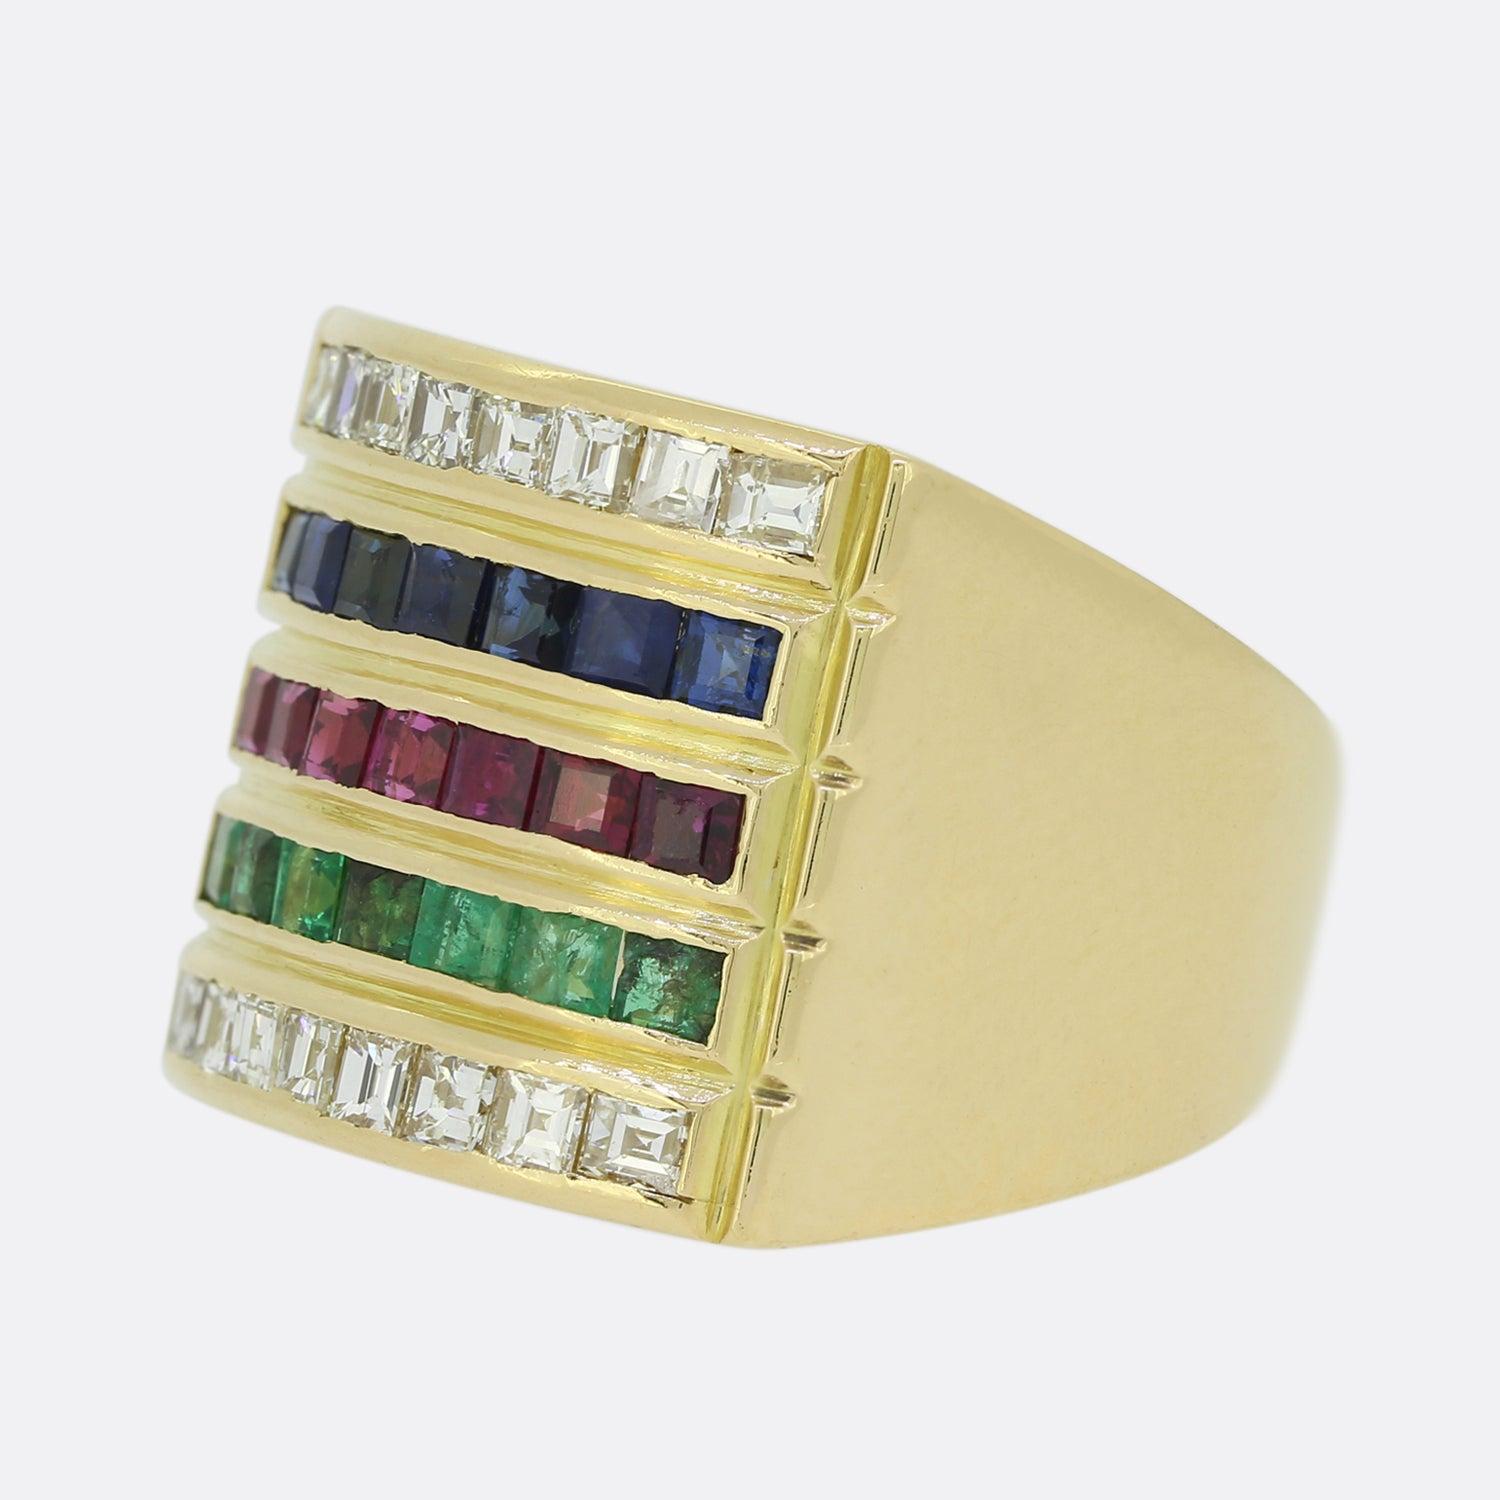 This is a vintage 18ct yellow gold multi gemstone ring. The gemstones consist of carre cut diamonds, sapphires, rubies and emeralds. They are set over five rows and it is a fun and colourful look, fitting comfortably on the finger. All of the